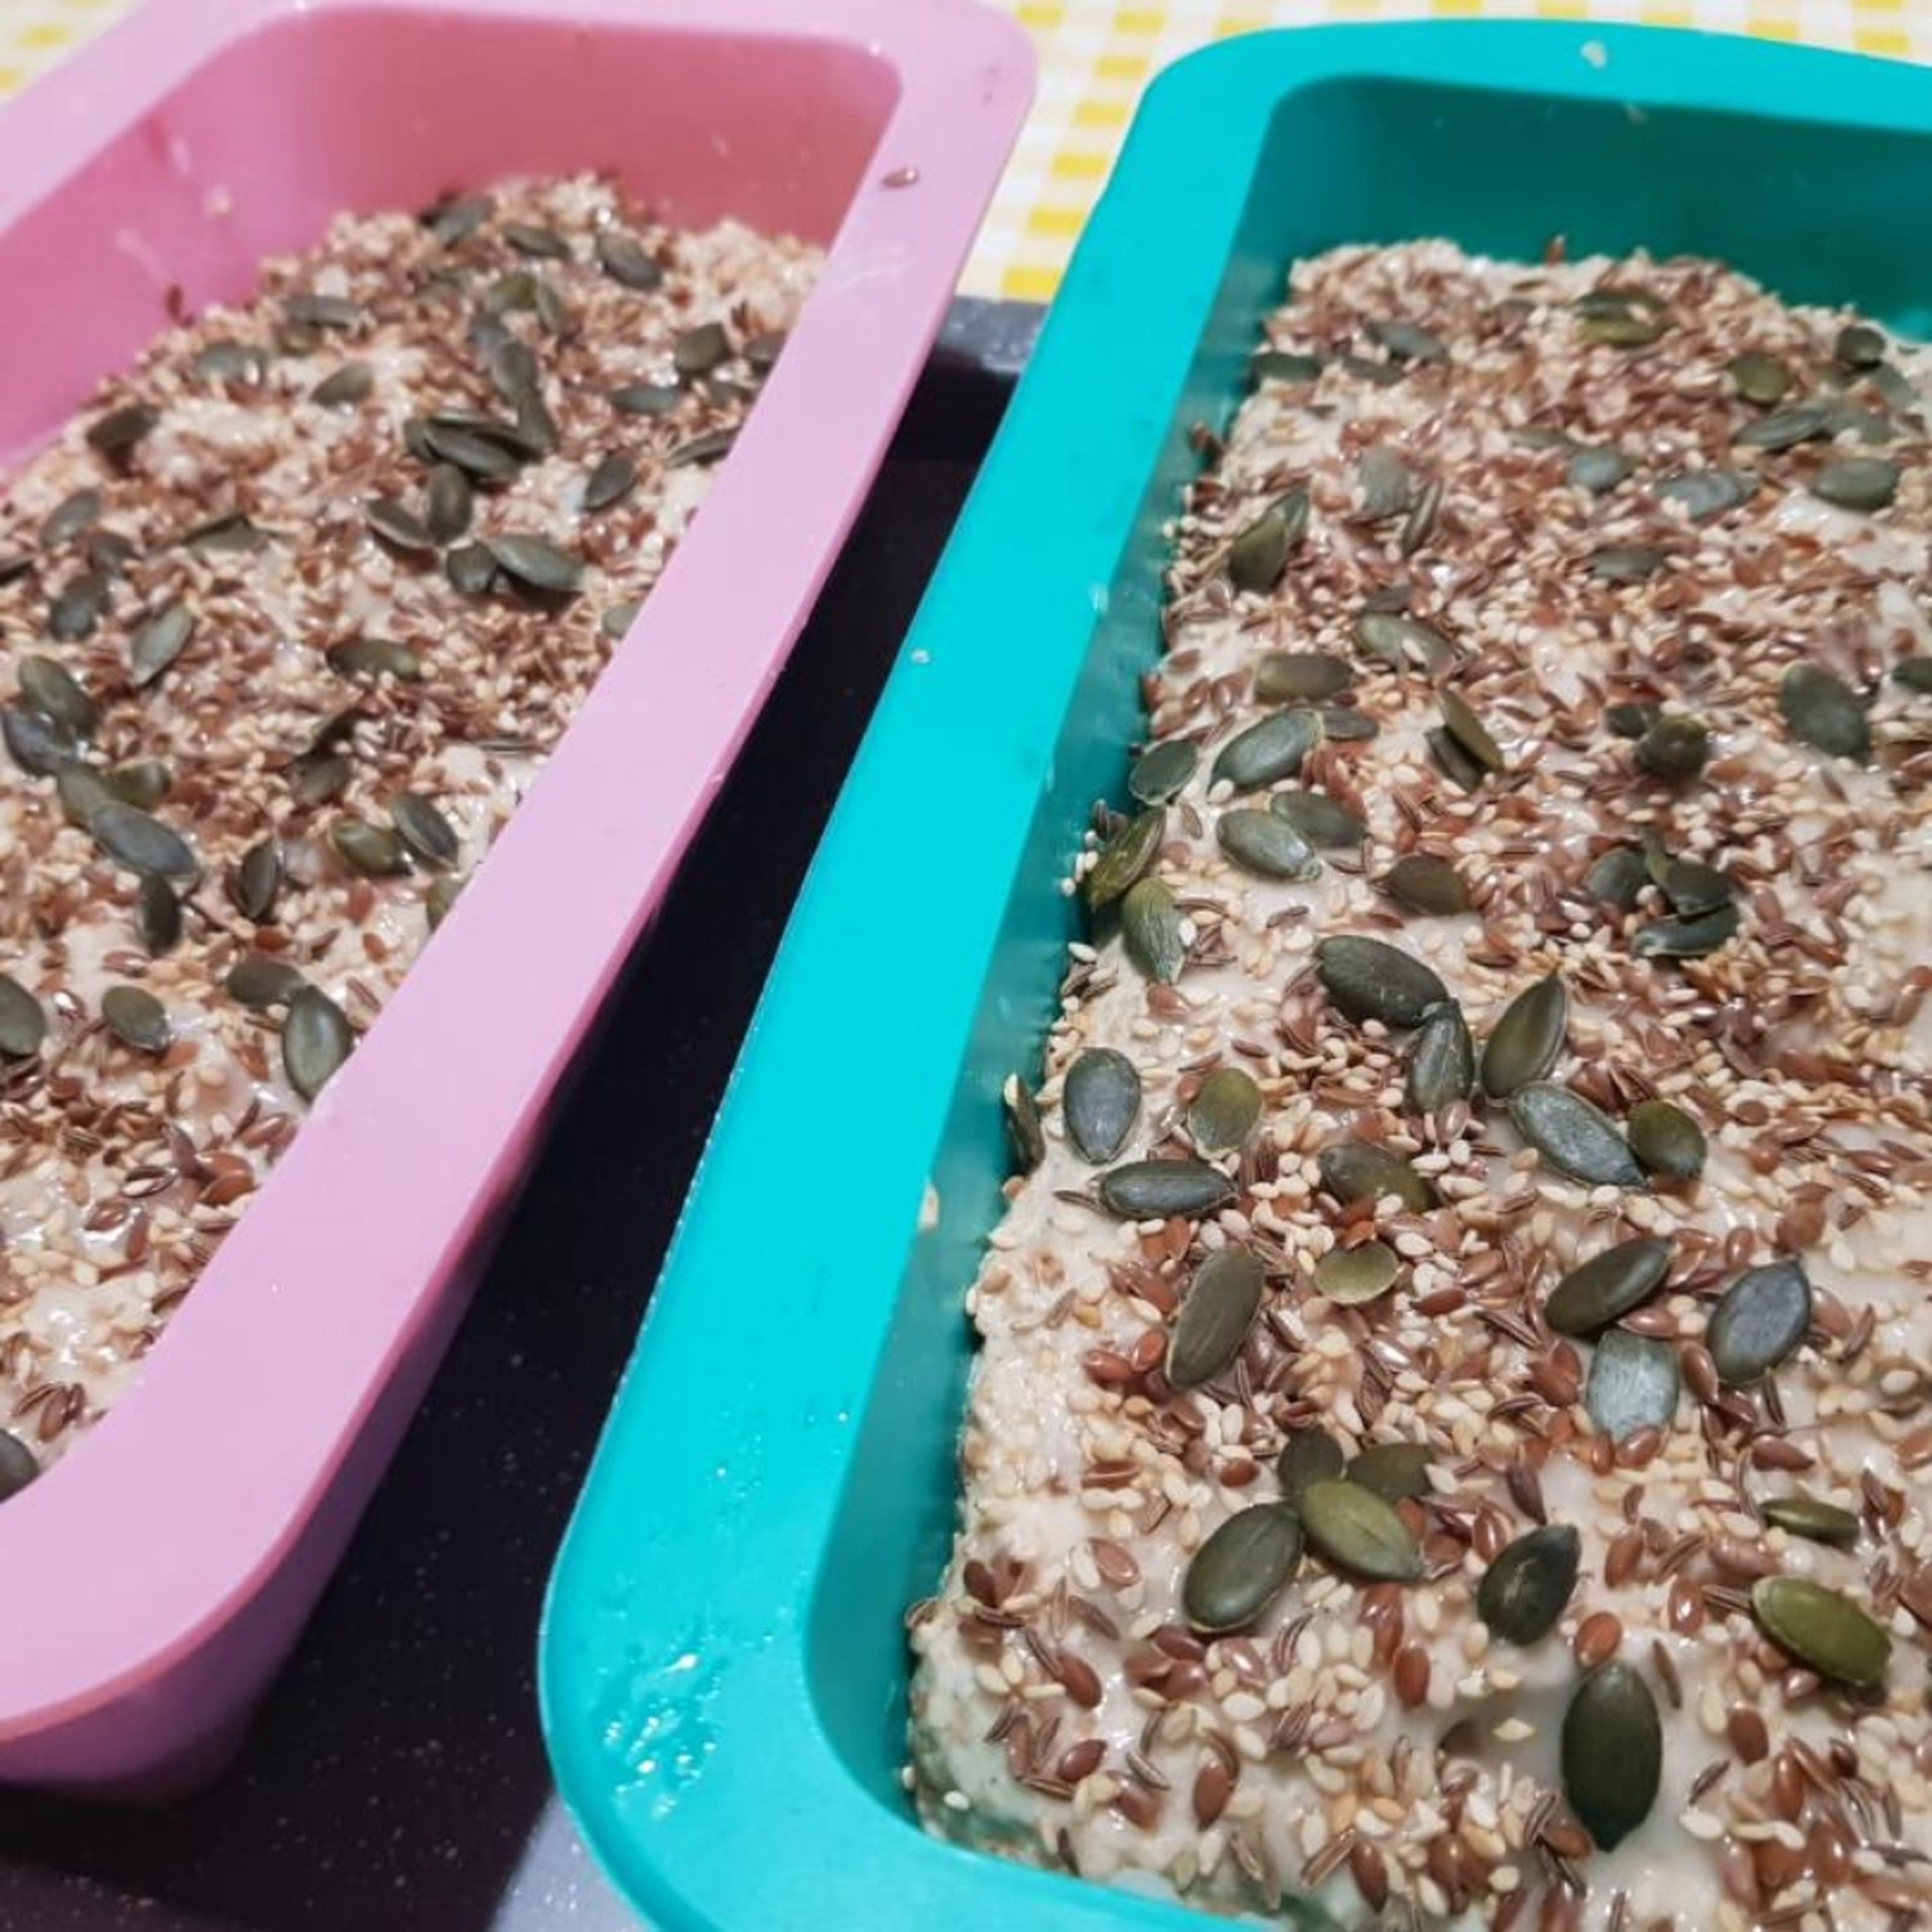 When the second time the dough rises, mix it again, and put it in the mold. Cover it with the mix of water and dough, and coat it with the layer of seeds. Let it rest for another 10 minutes before putting in the oven.